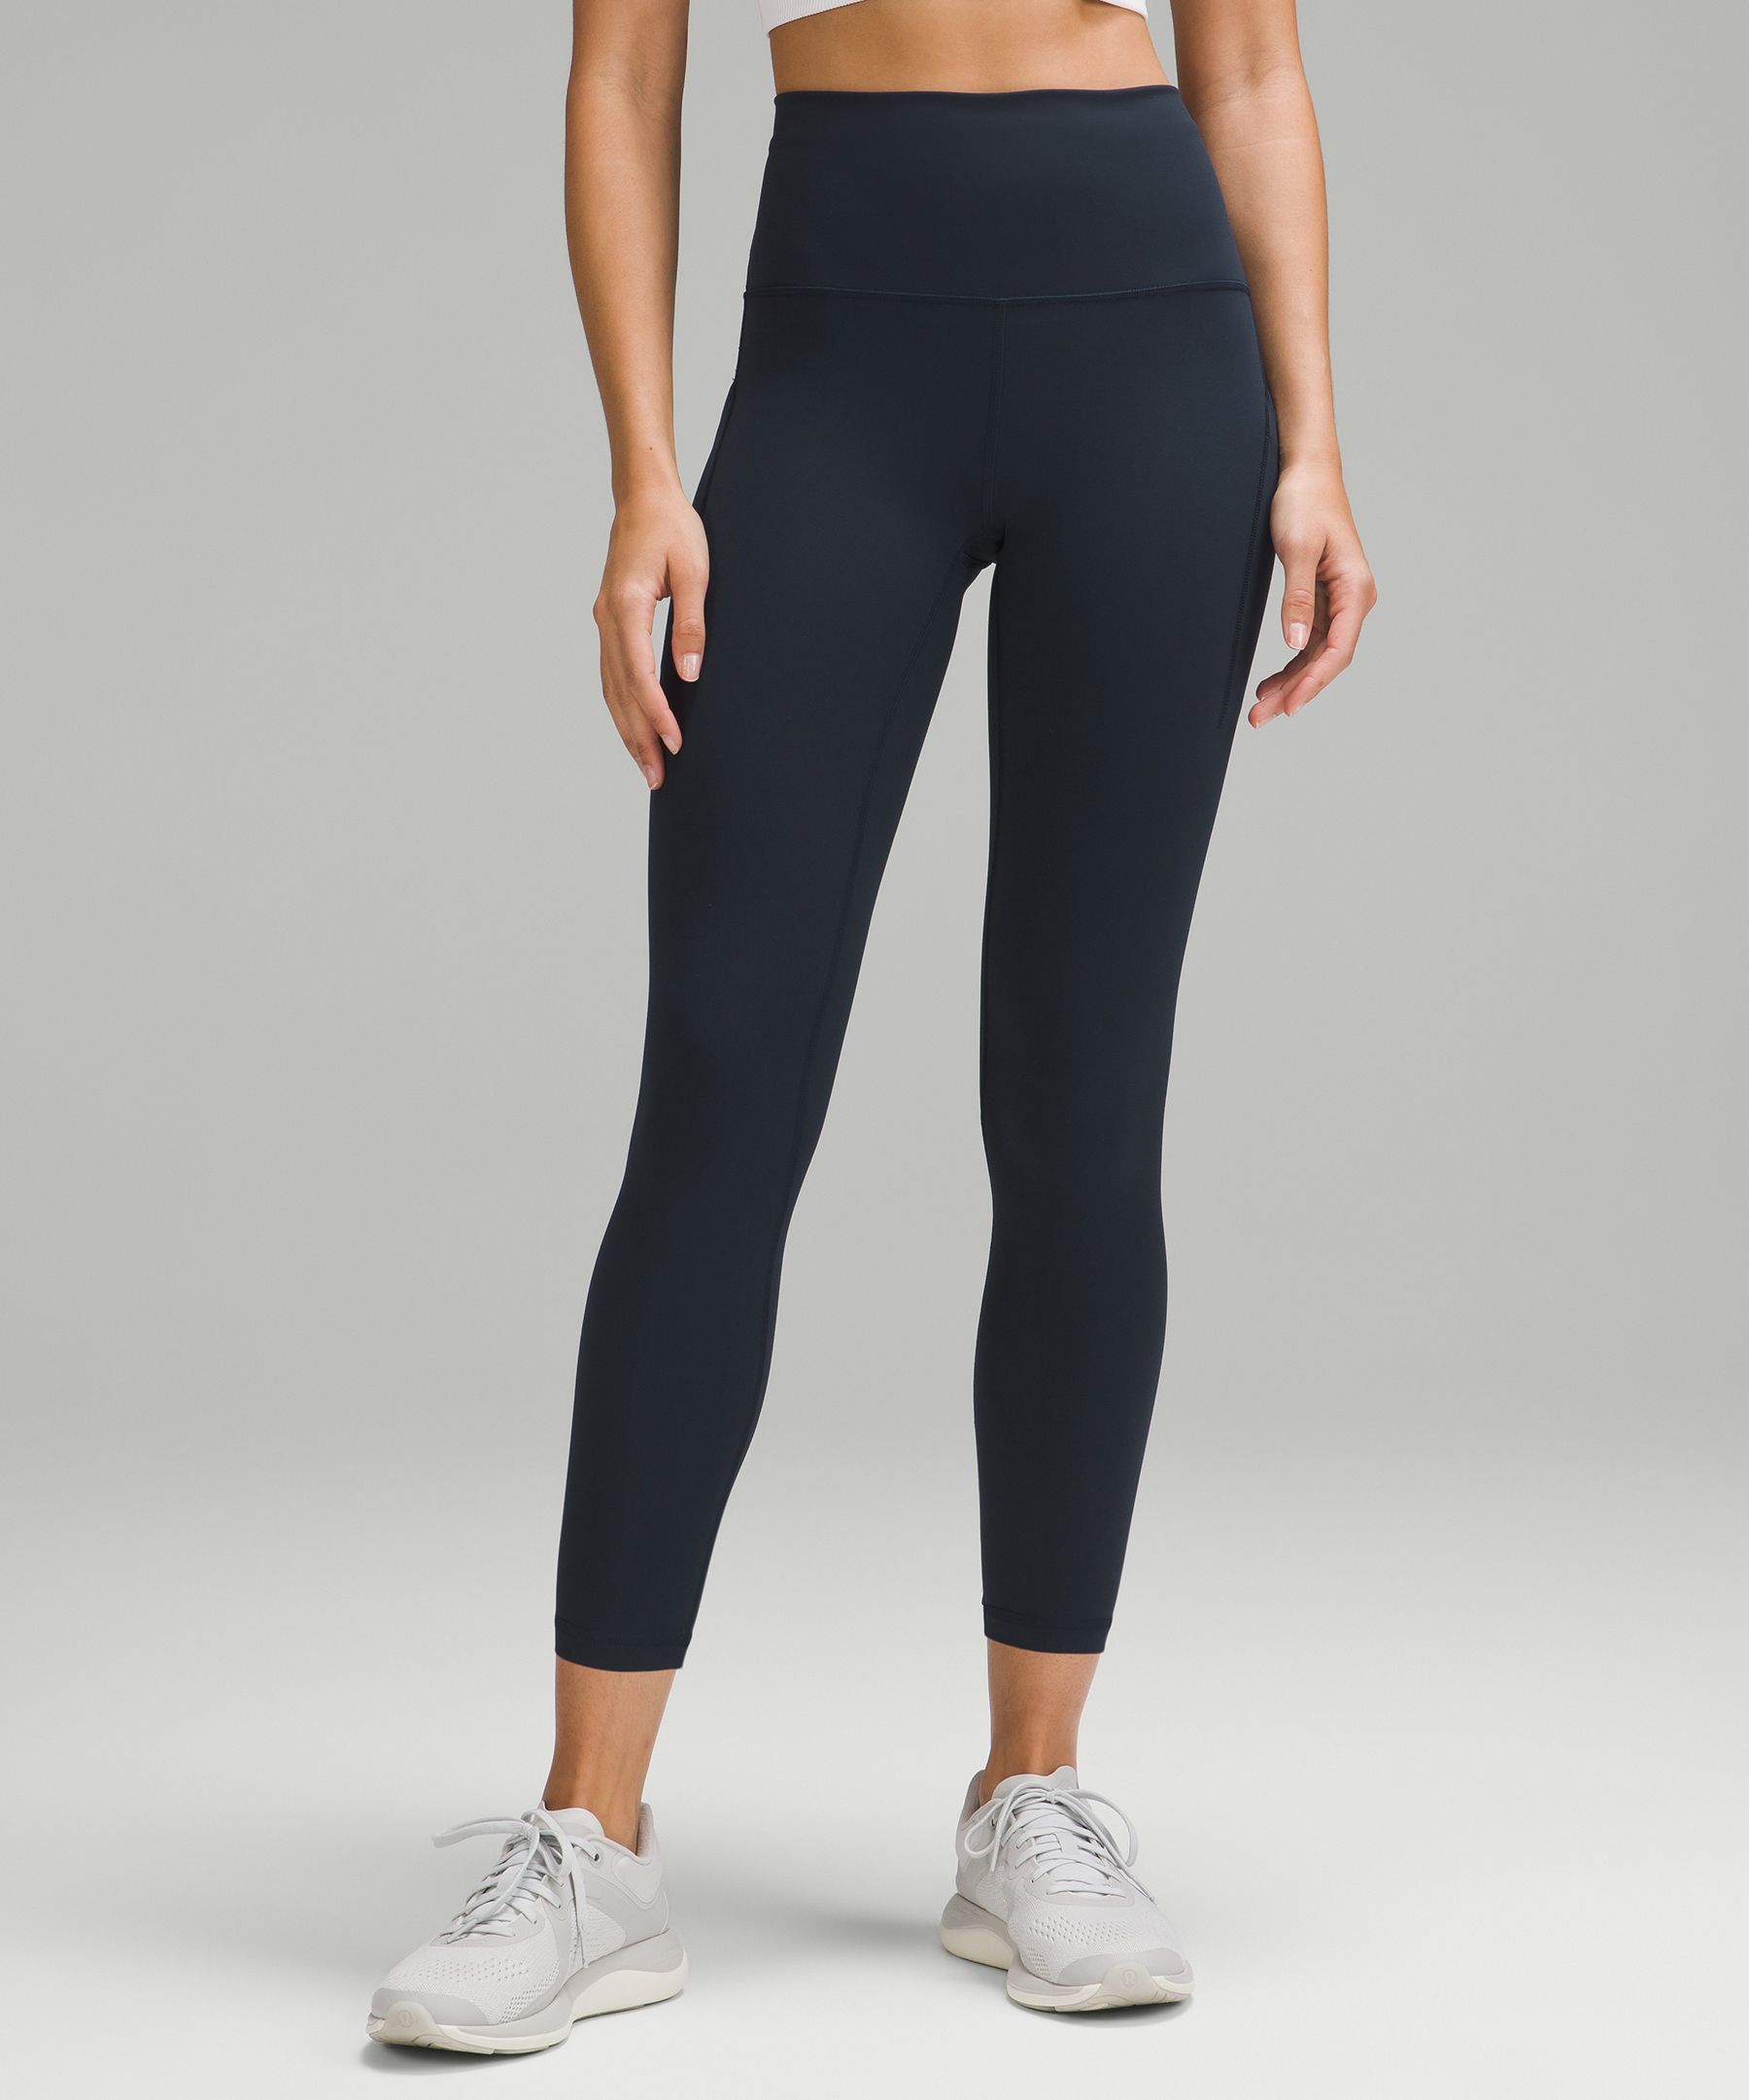 Lululemon Wunder Train High-rise Tights With Pockets 25"